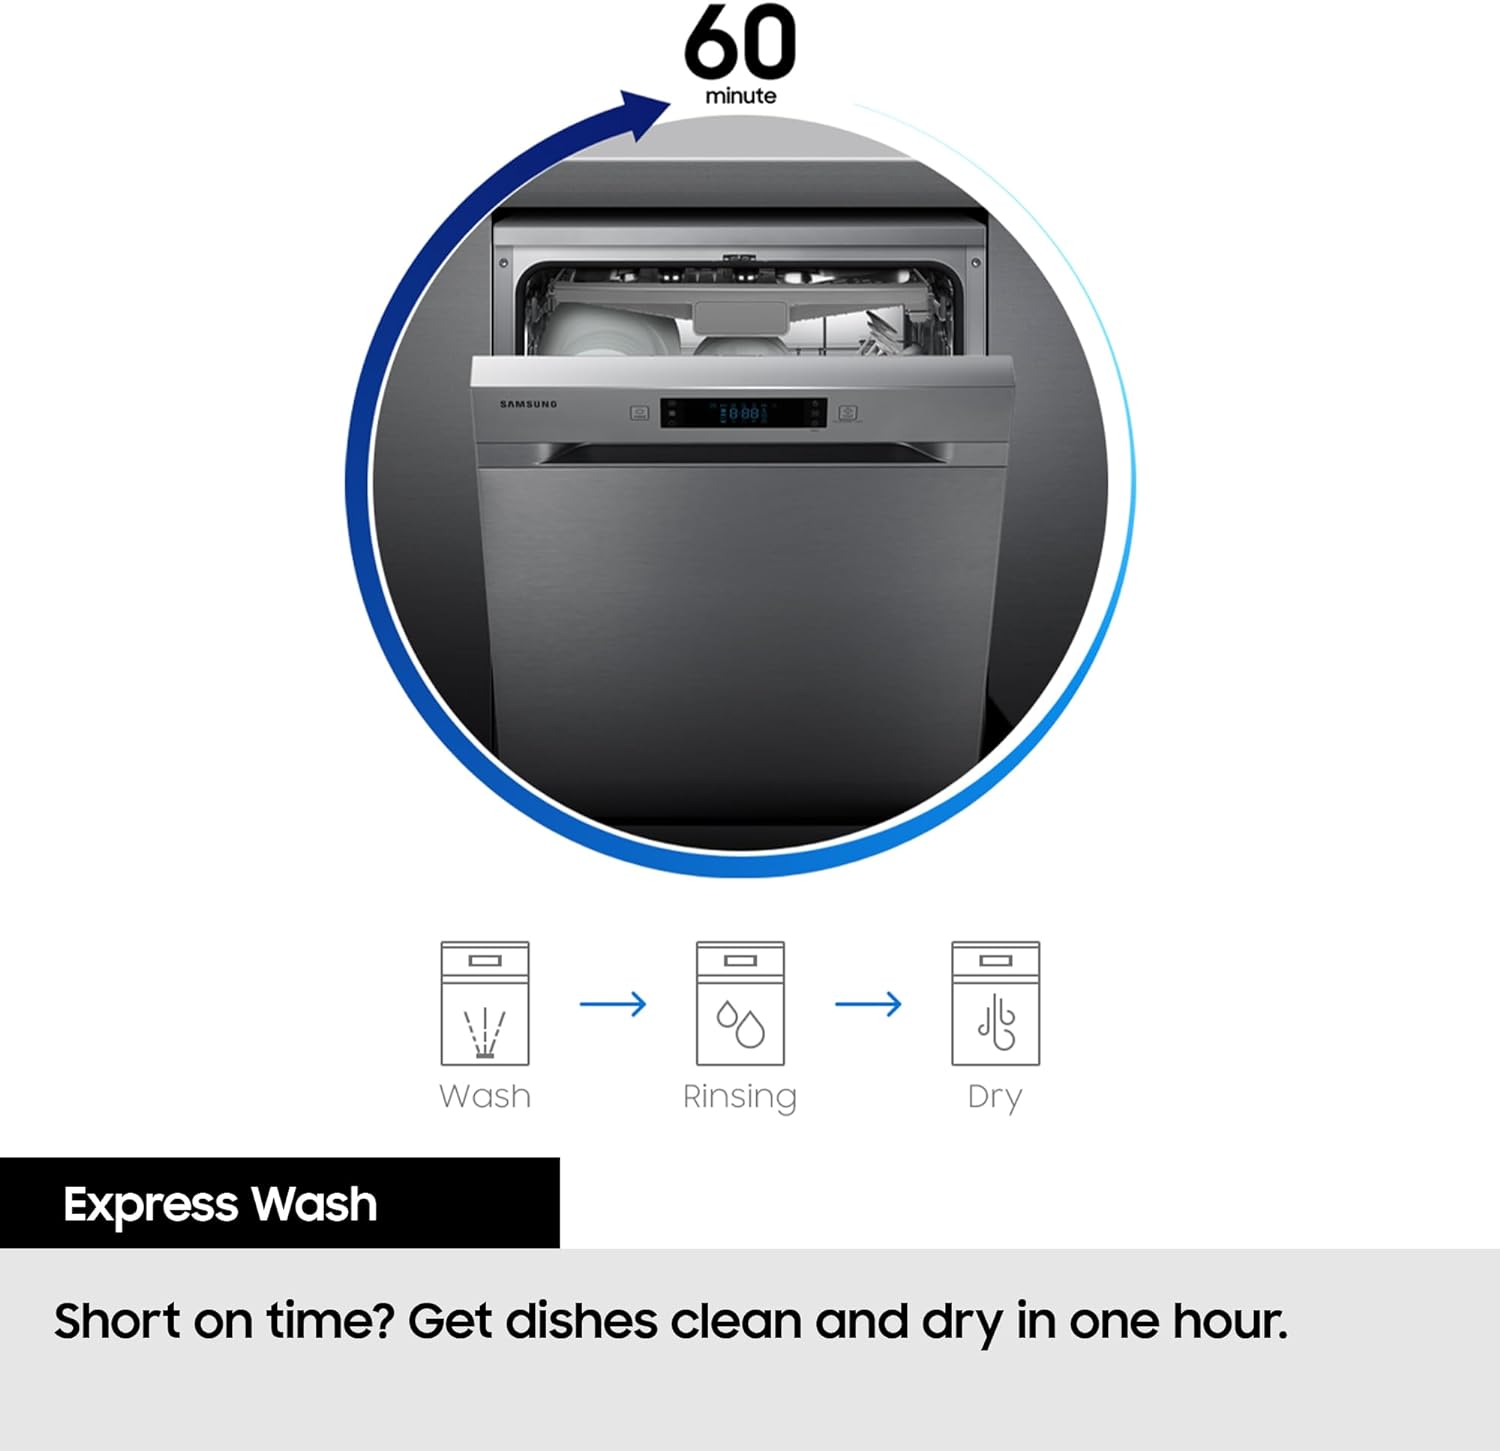 Samsung DW60M5050FW/EU Series 5 Dishwasher, Freestanding, Full Size, 13 Place Settings White - Amazing Gadgets Outlet